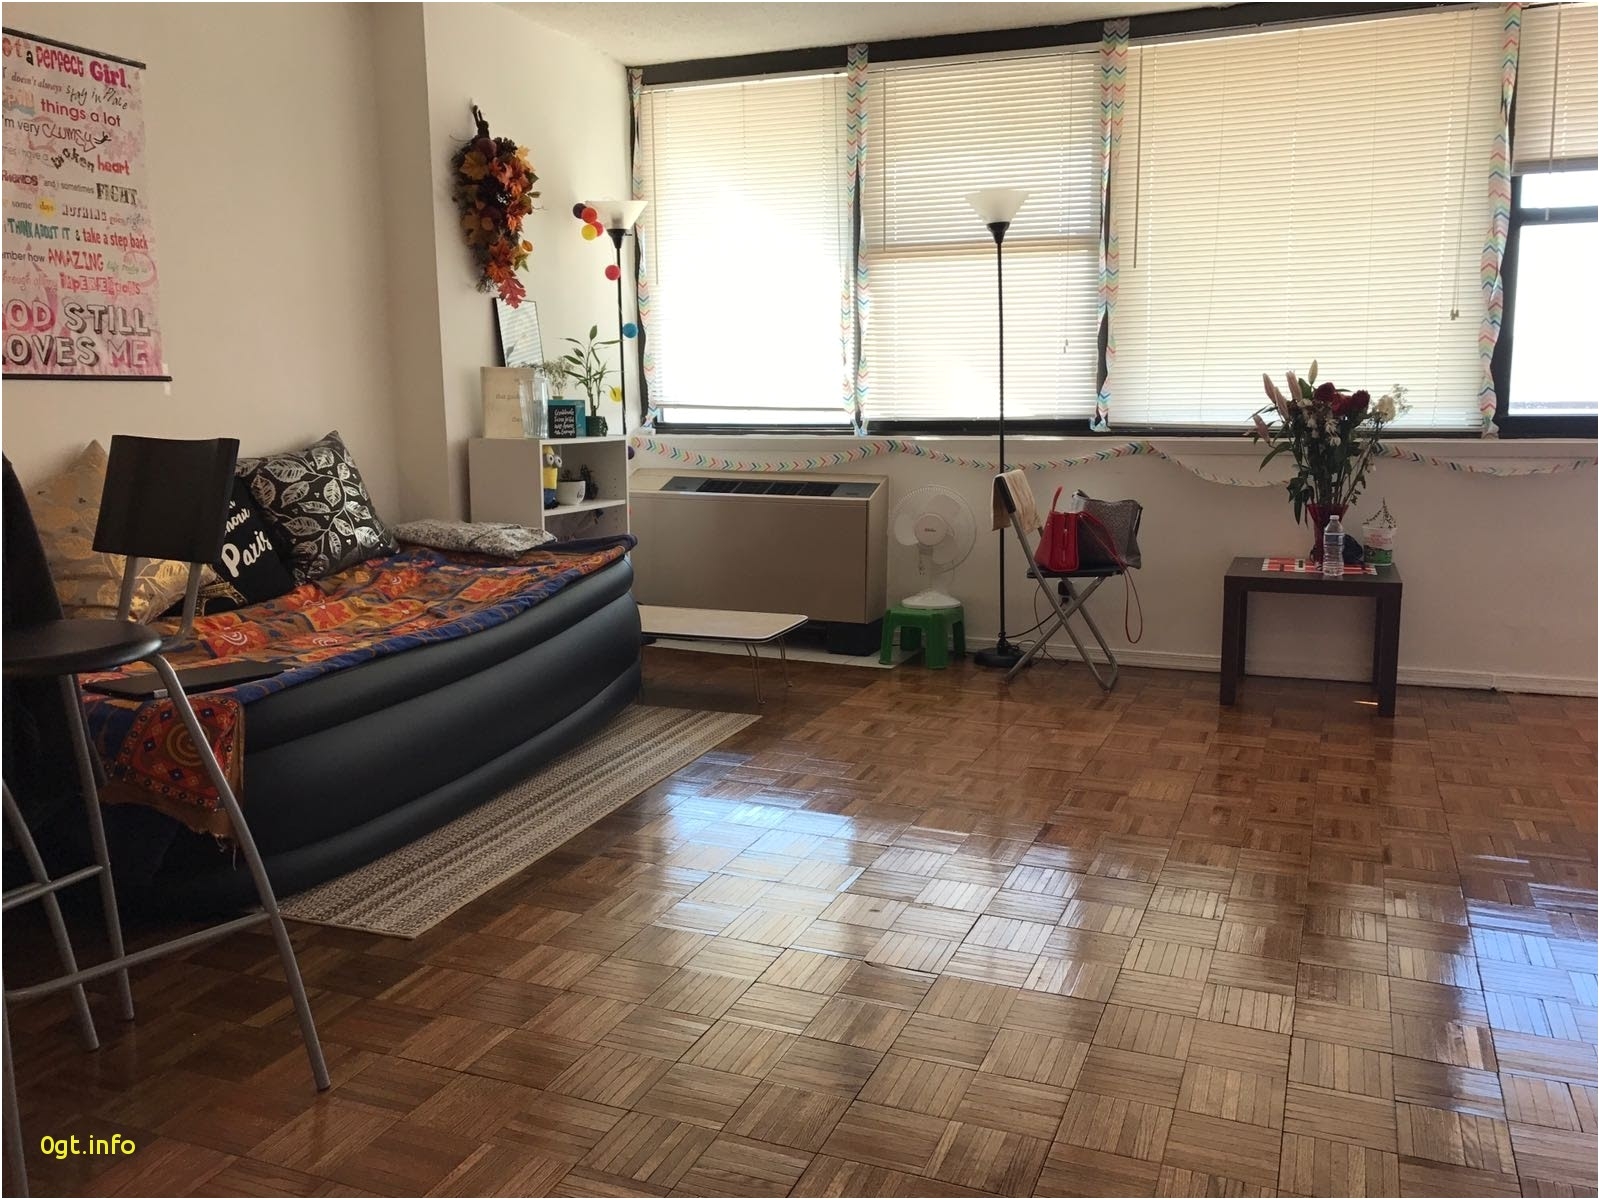 one bedroom apartments madison wi beautiful 1 bedroom apartment to rent in ozone park ny single